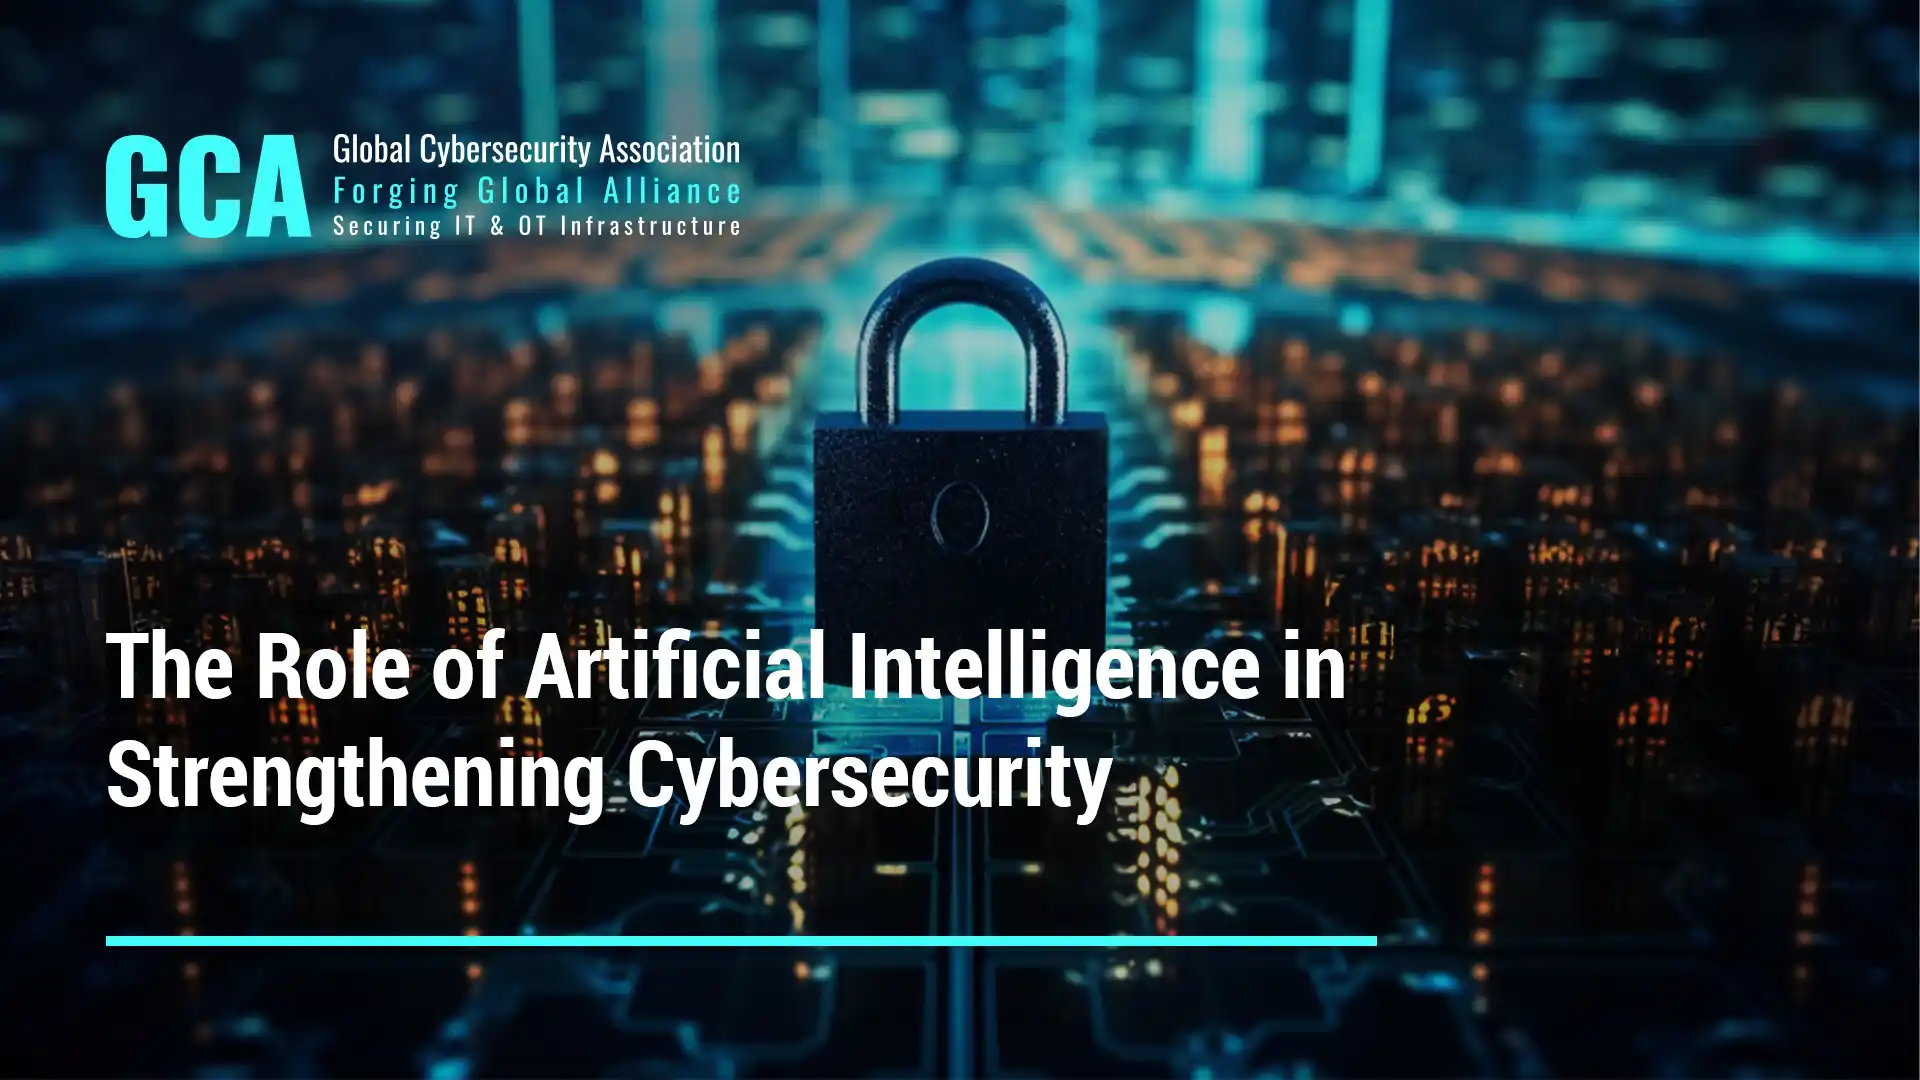 The Role of Artificial Intelligence in Strengthening Cybersecurity